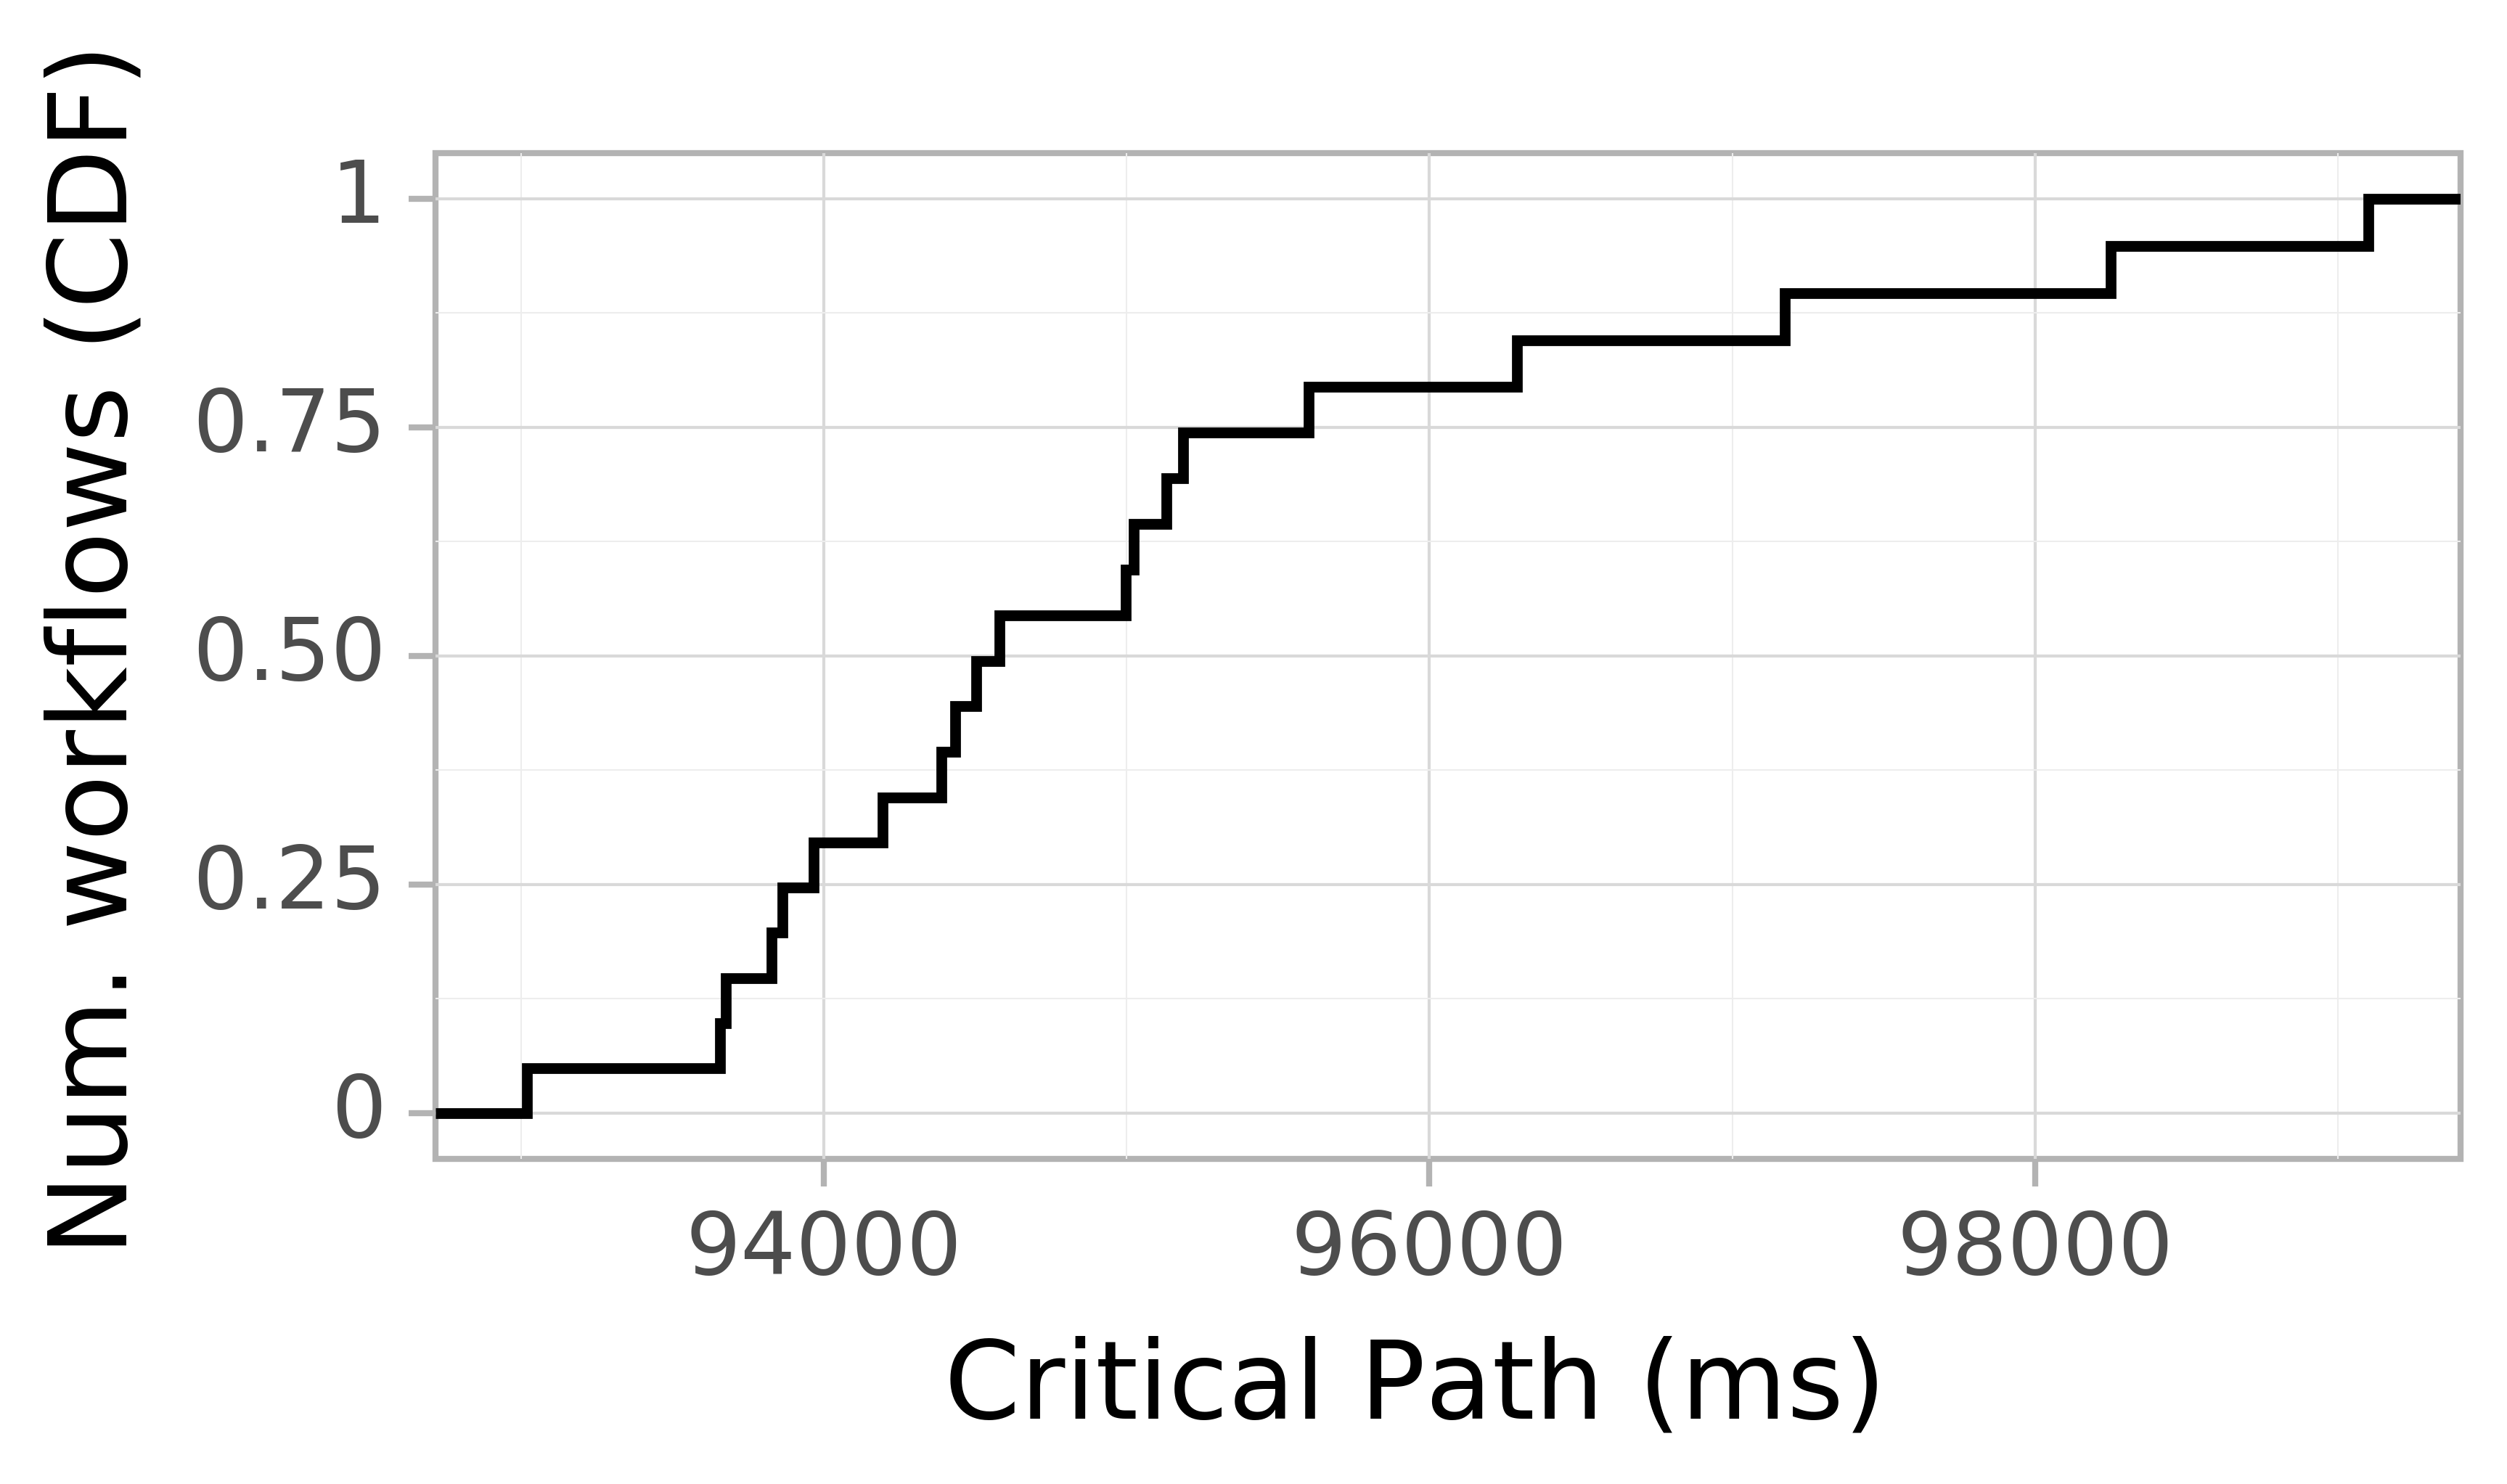 Job runtime CDF graph for the askalon-new_ee10 trace.